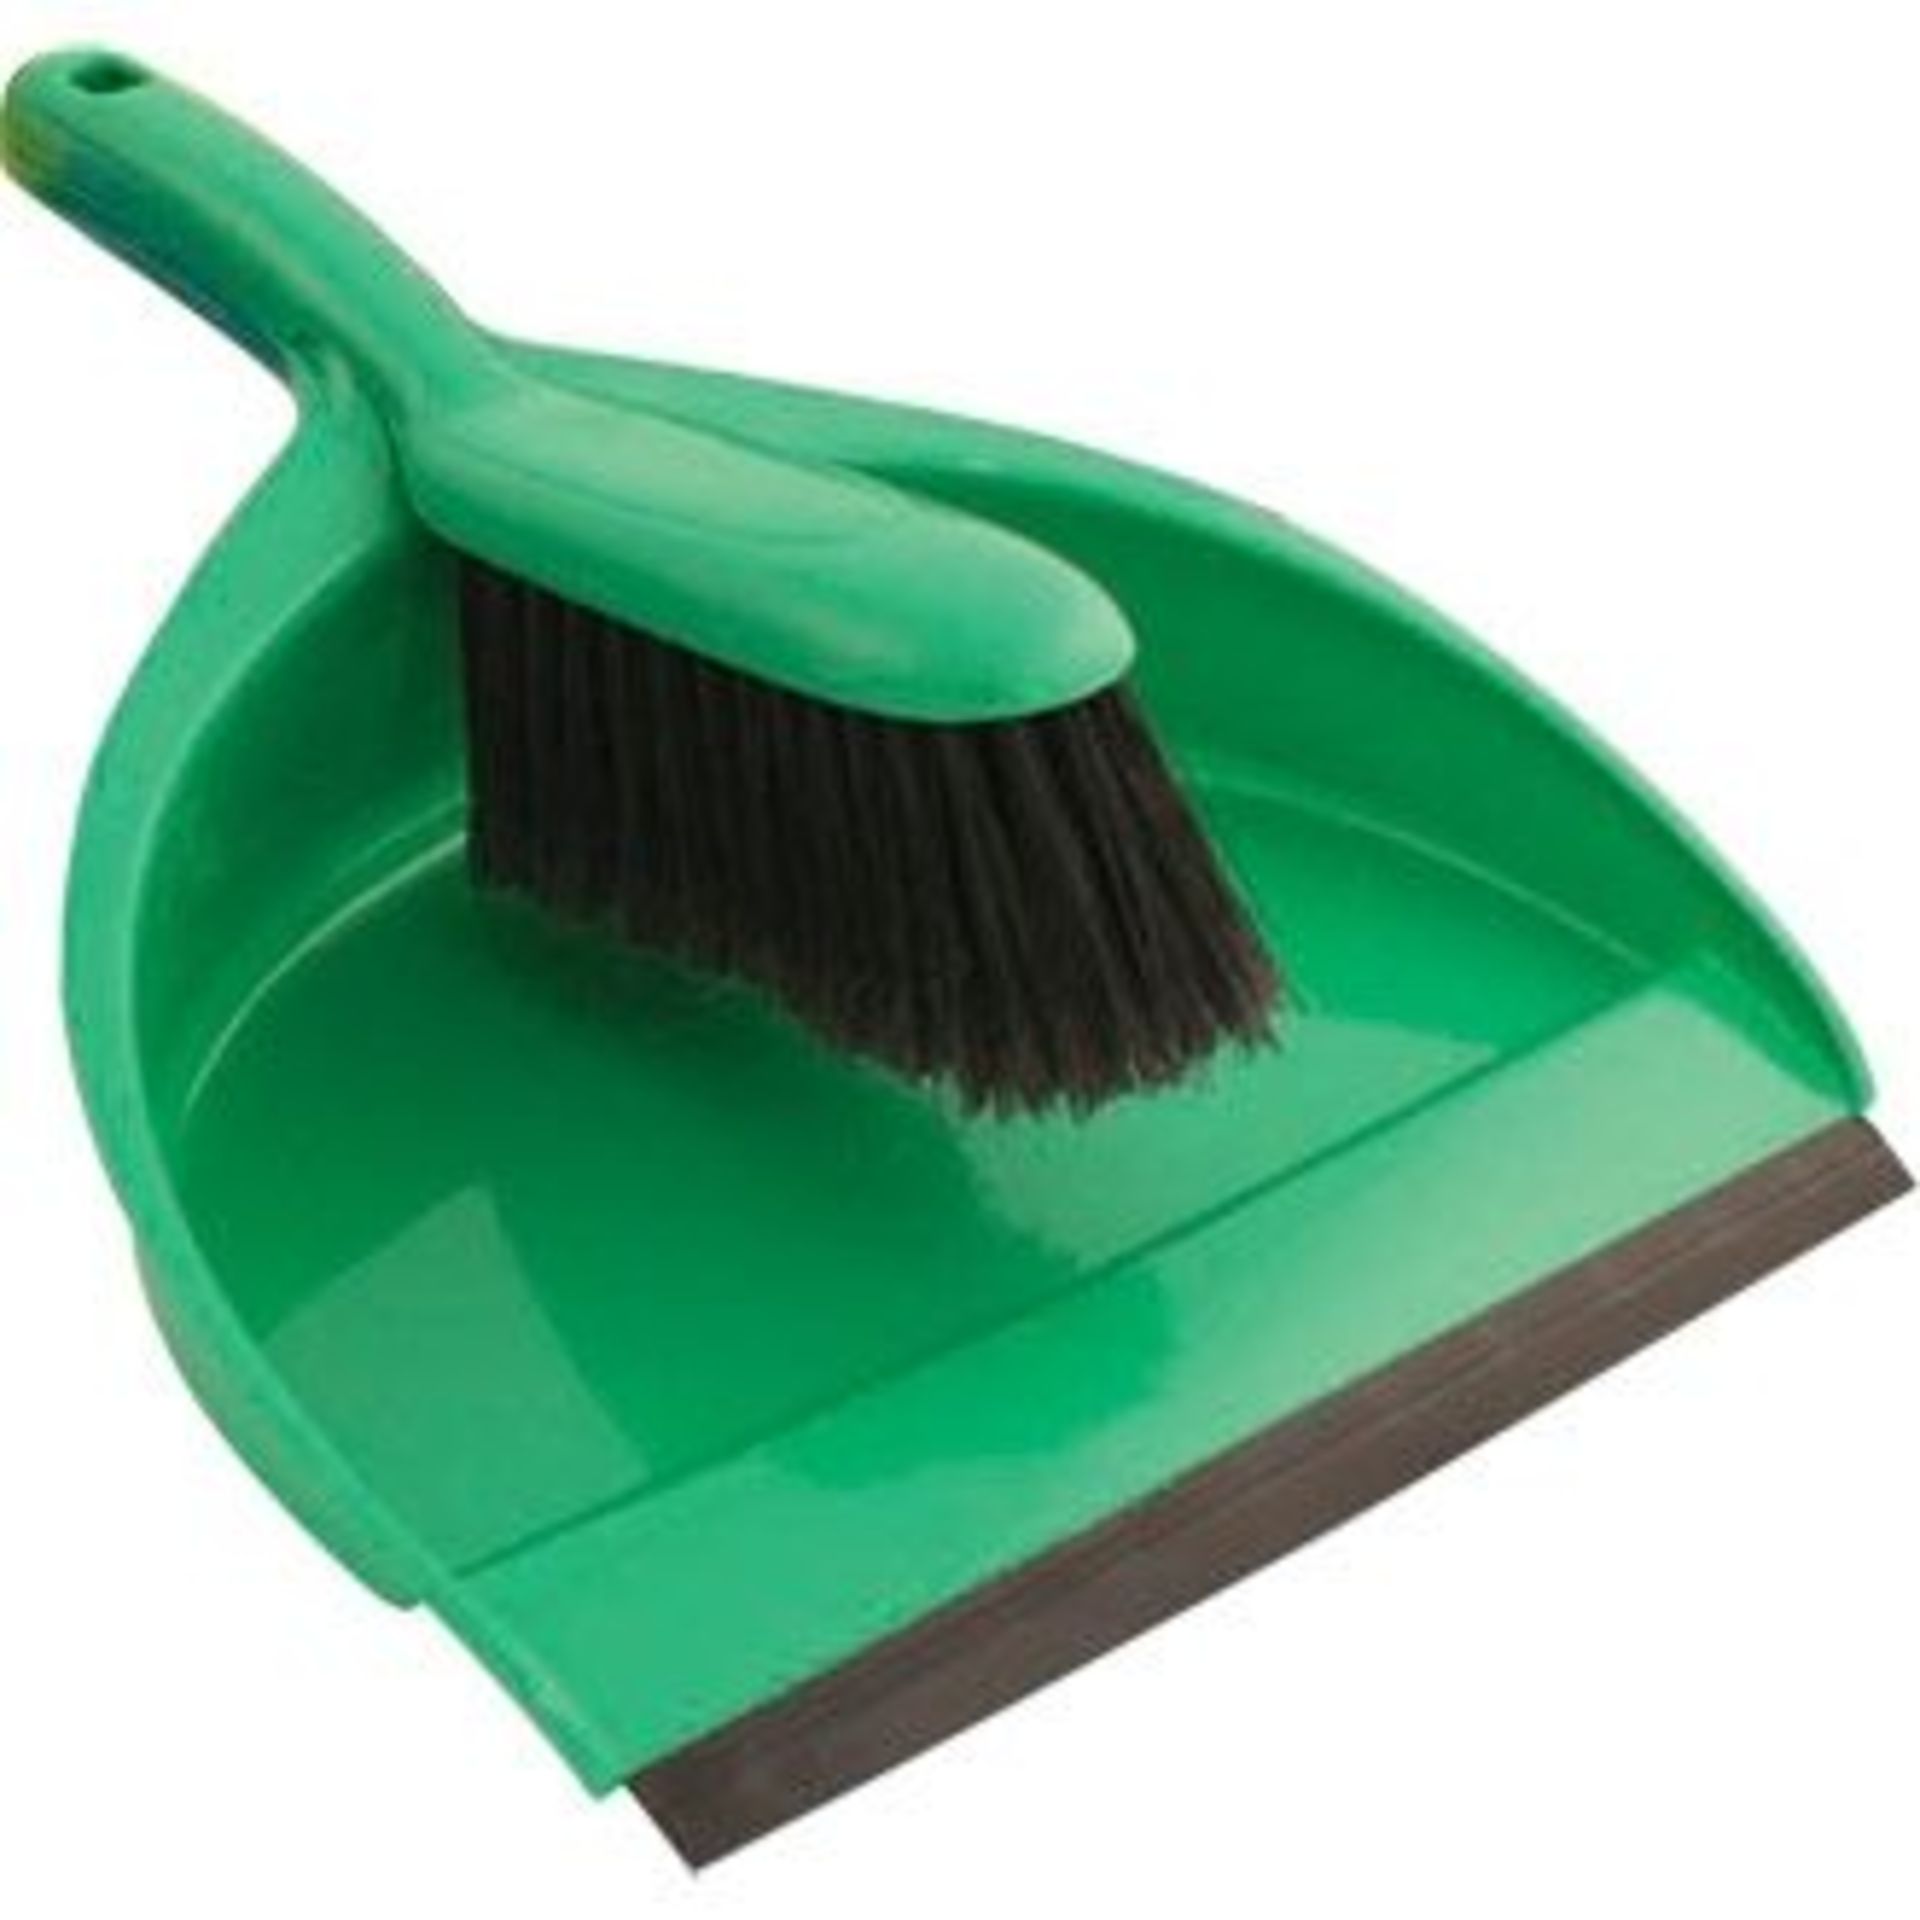 V *TRADE QTY* Brand New Six Dustpan & Brush Sets X 5 YOUR BID PRICE TO BE MULTIPLIED BY FIVE